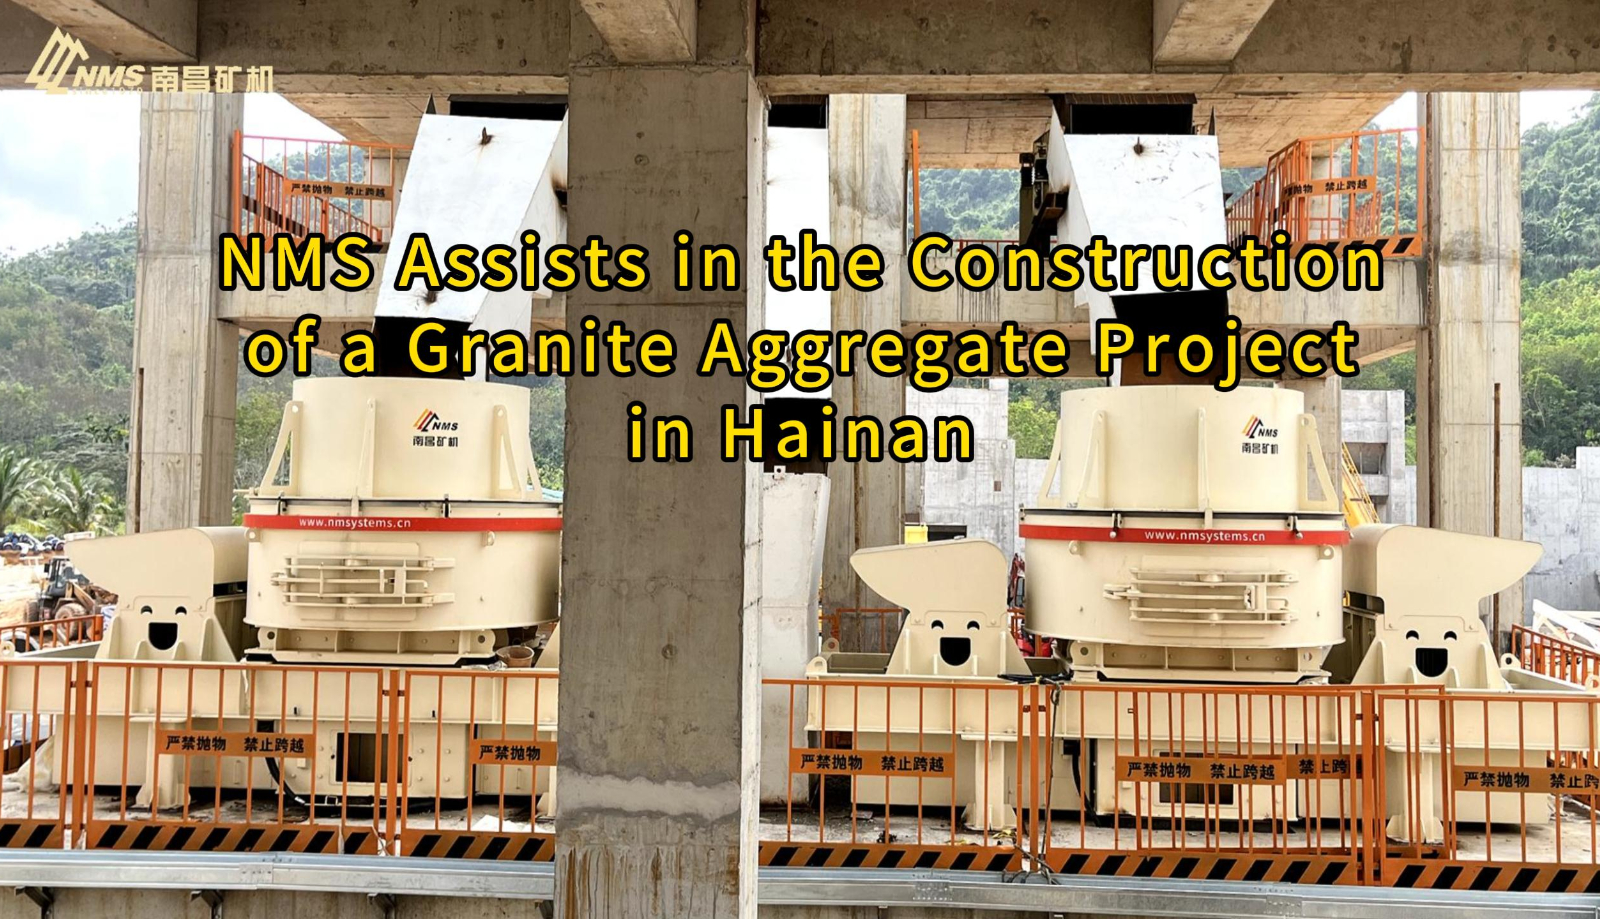 NMS Assists in the Construction of a Granite Aggregate Project in Hainan